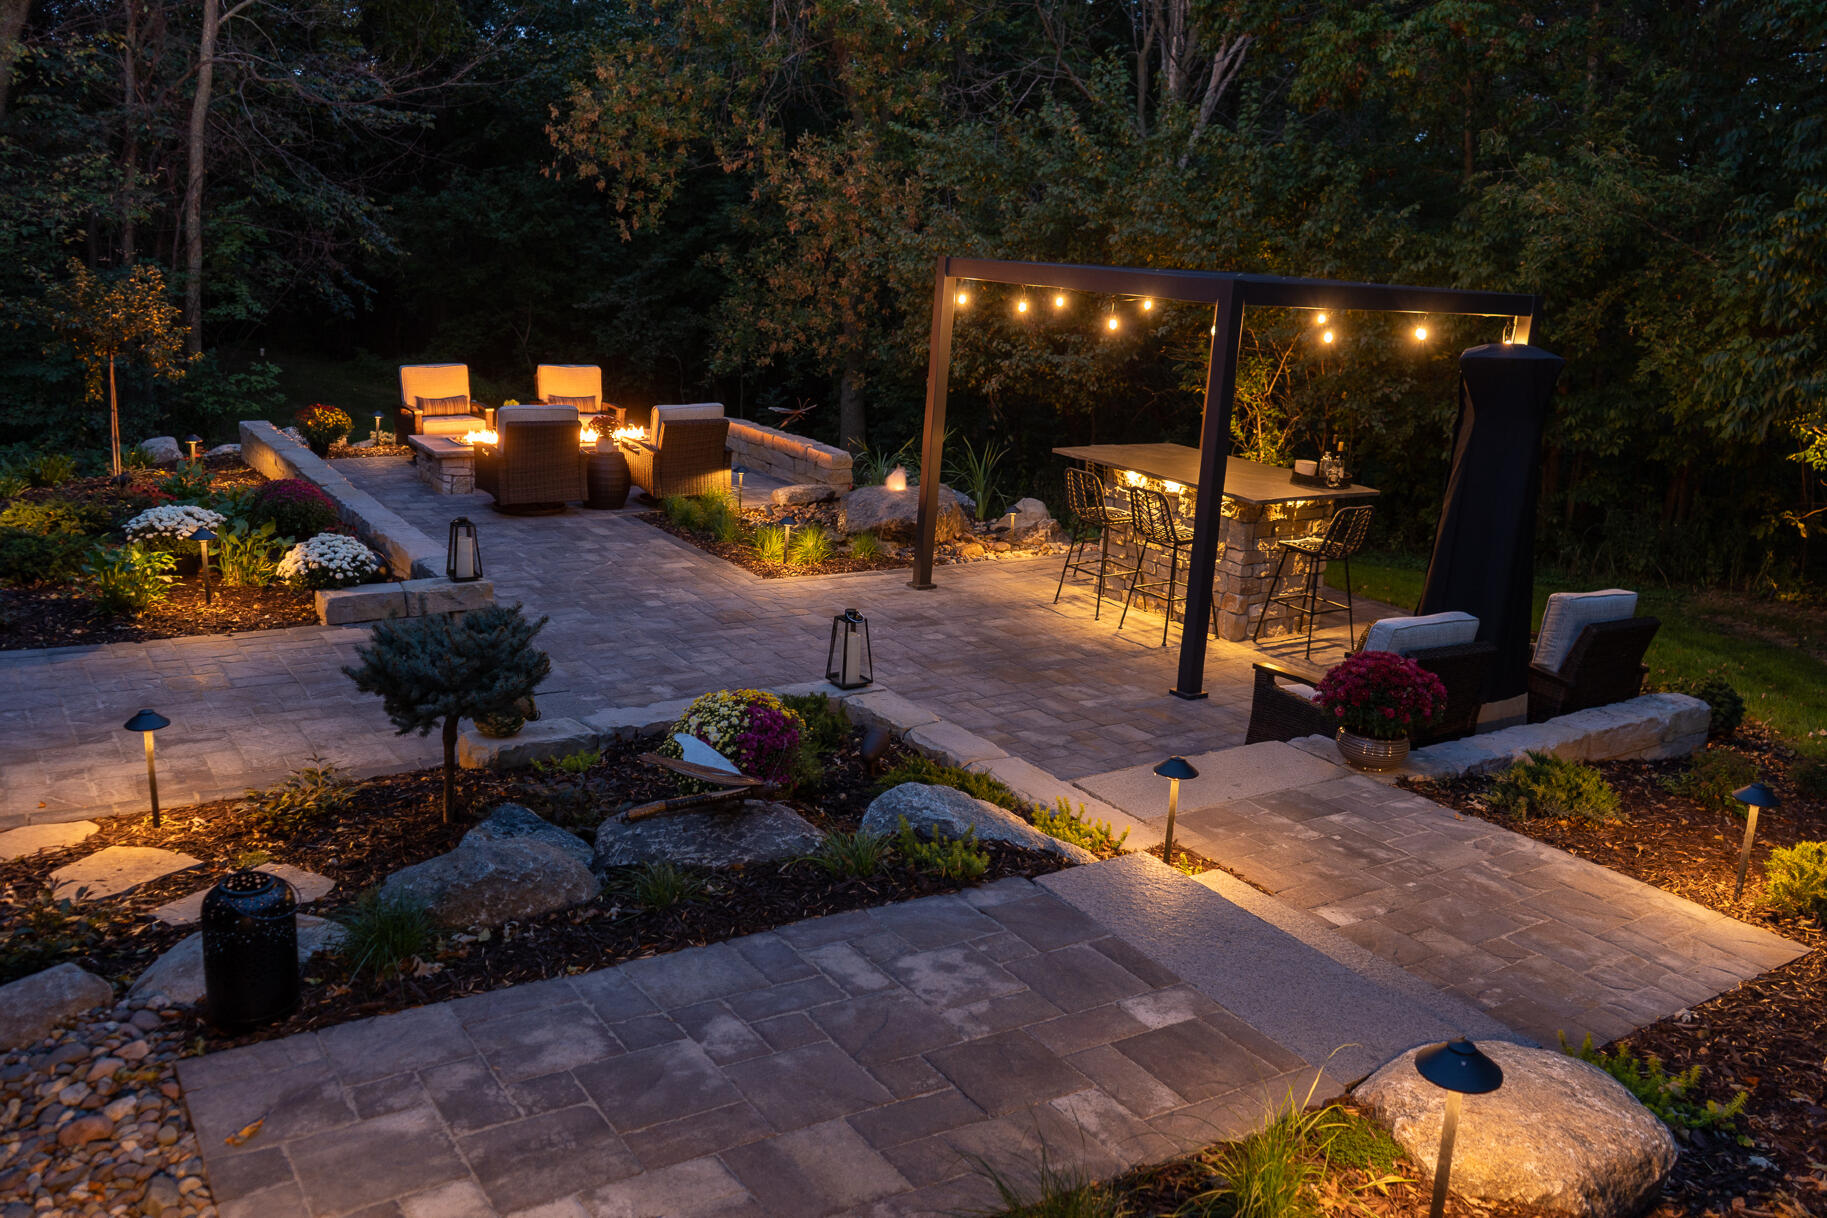 Patio Pavers with outdoor lighting and seating